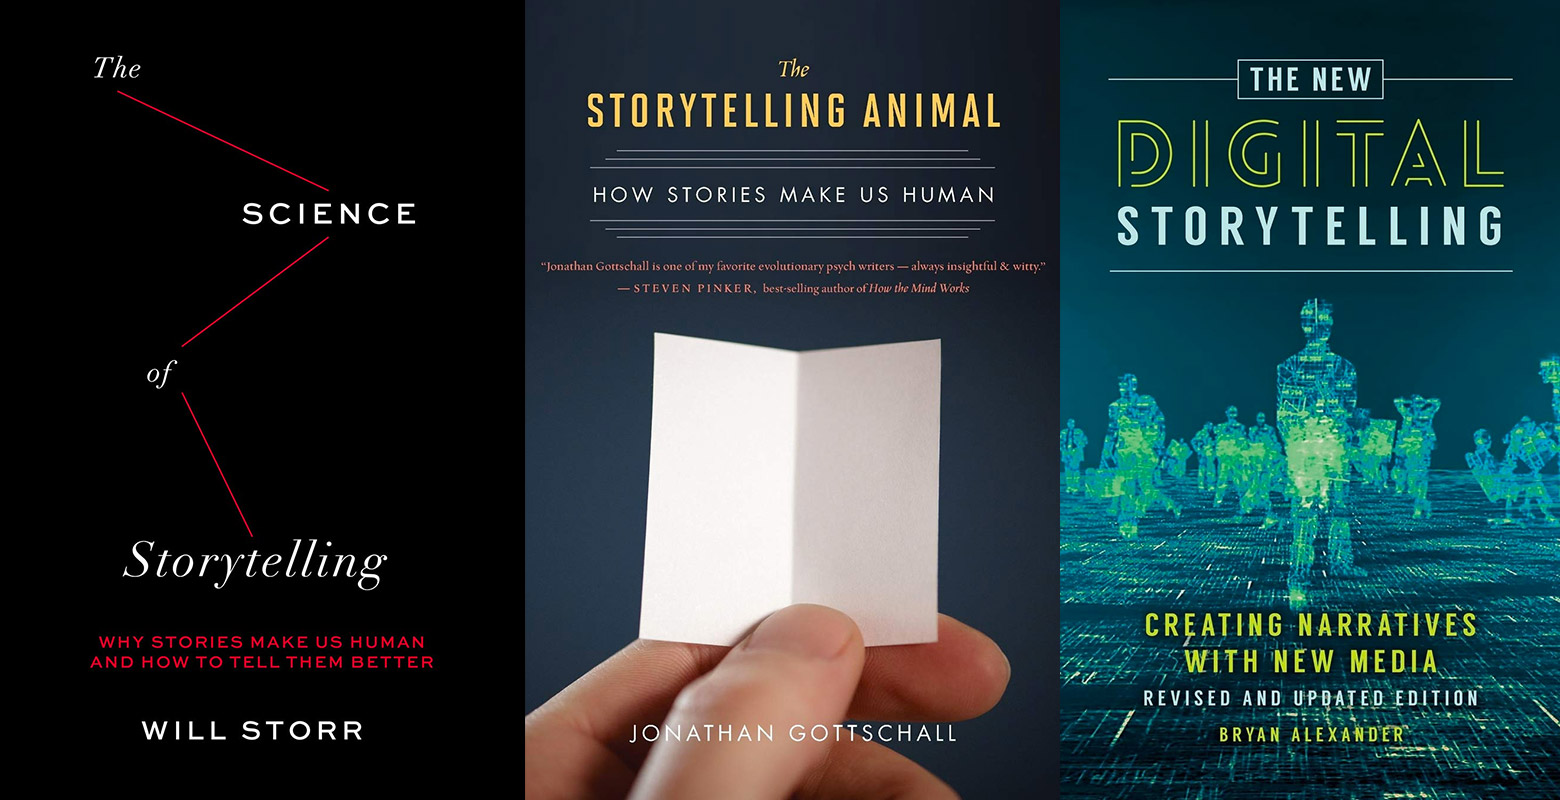 How to Tell Stories in the Digital World – 3 Books on Digital Storytelling